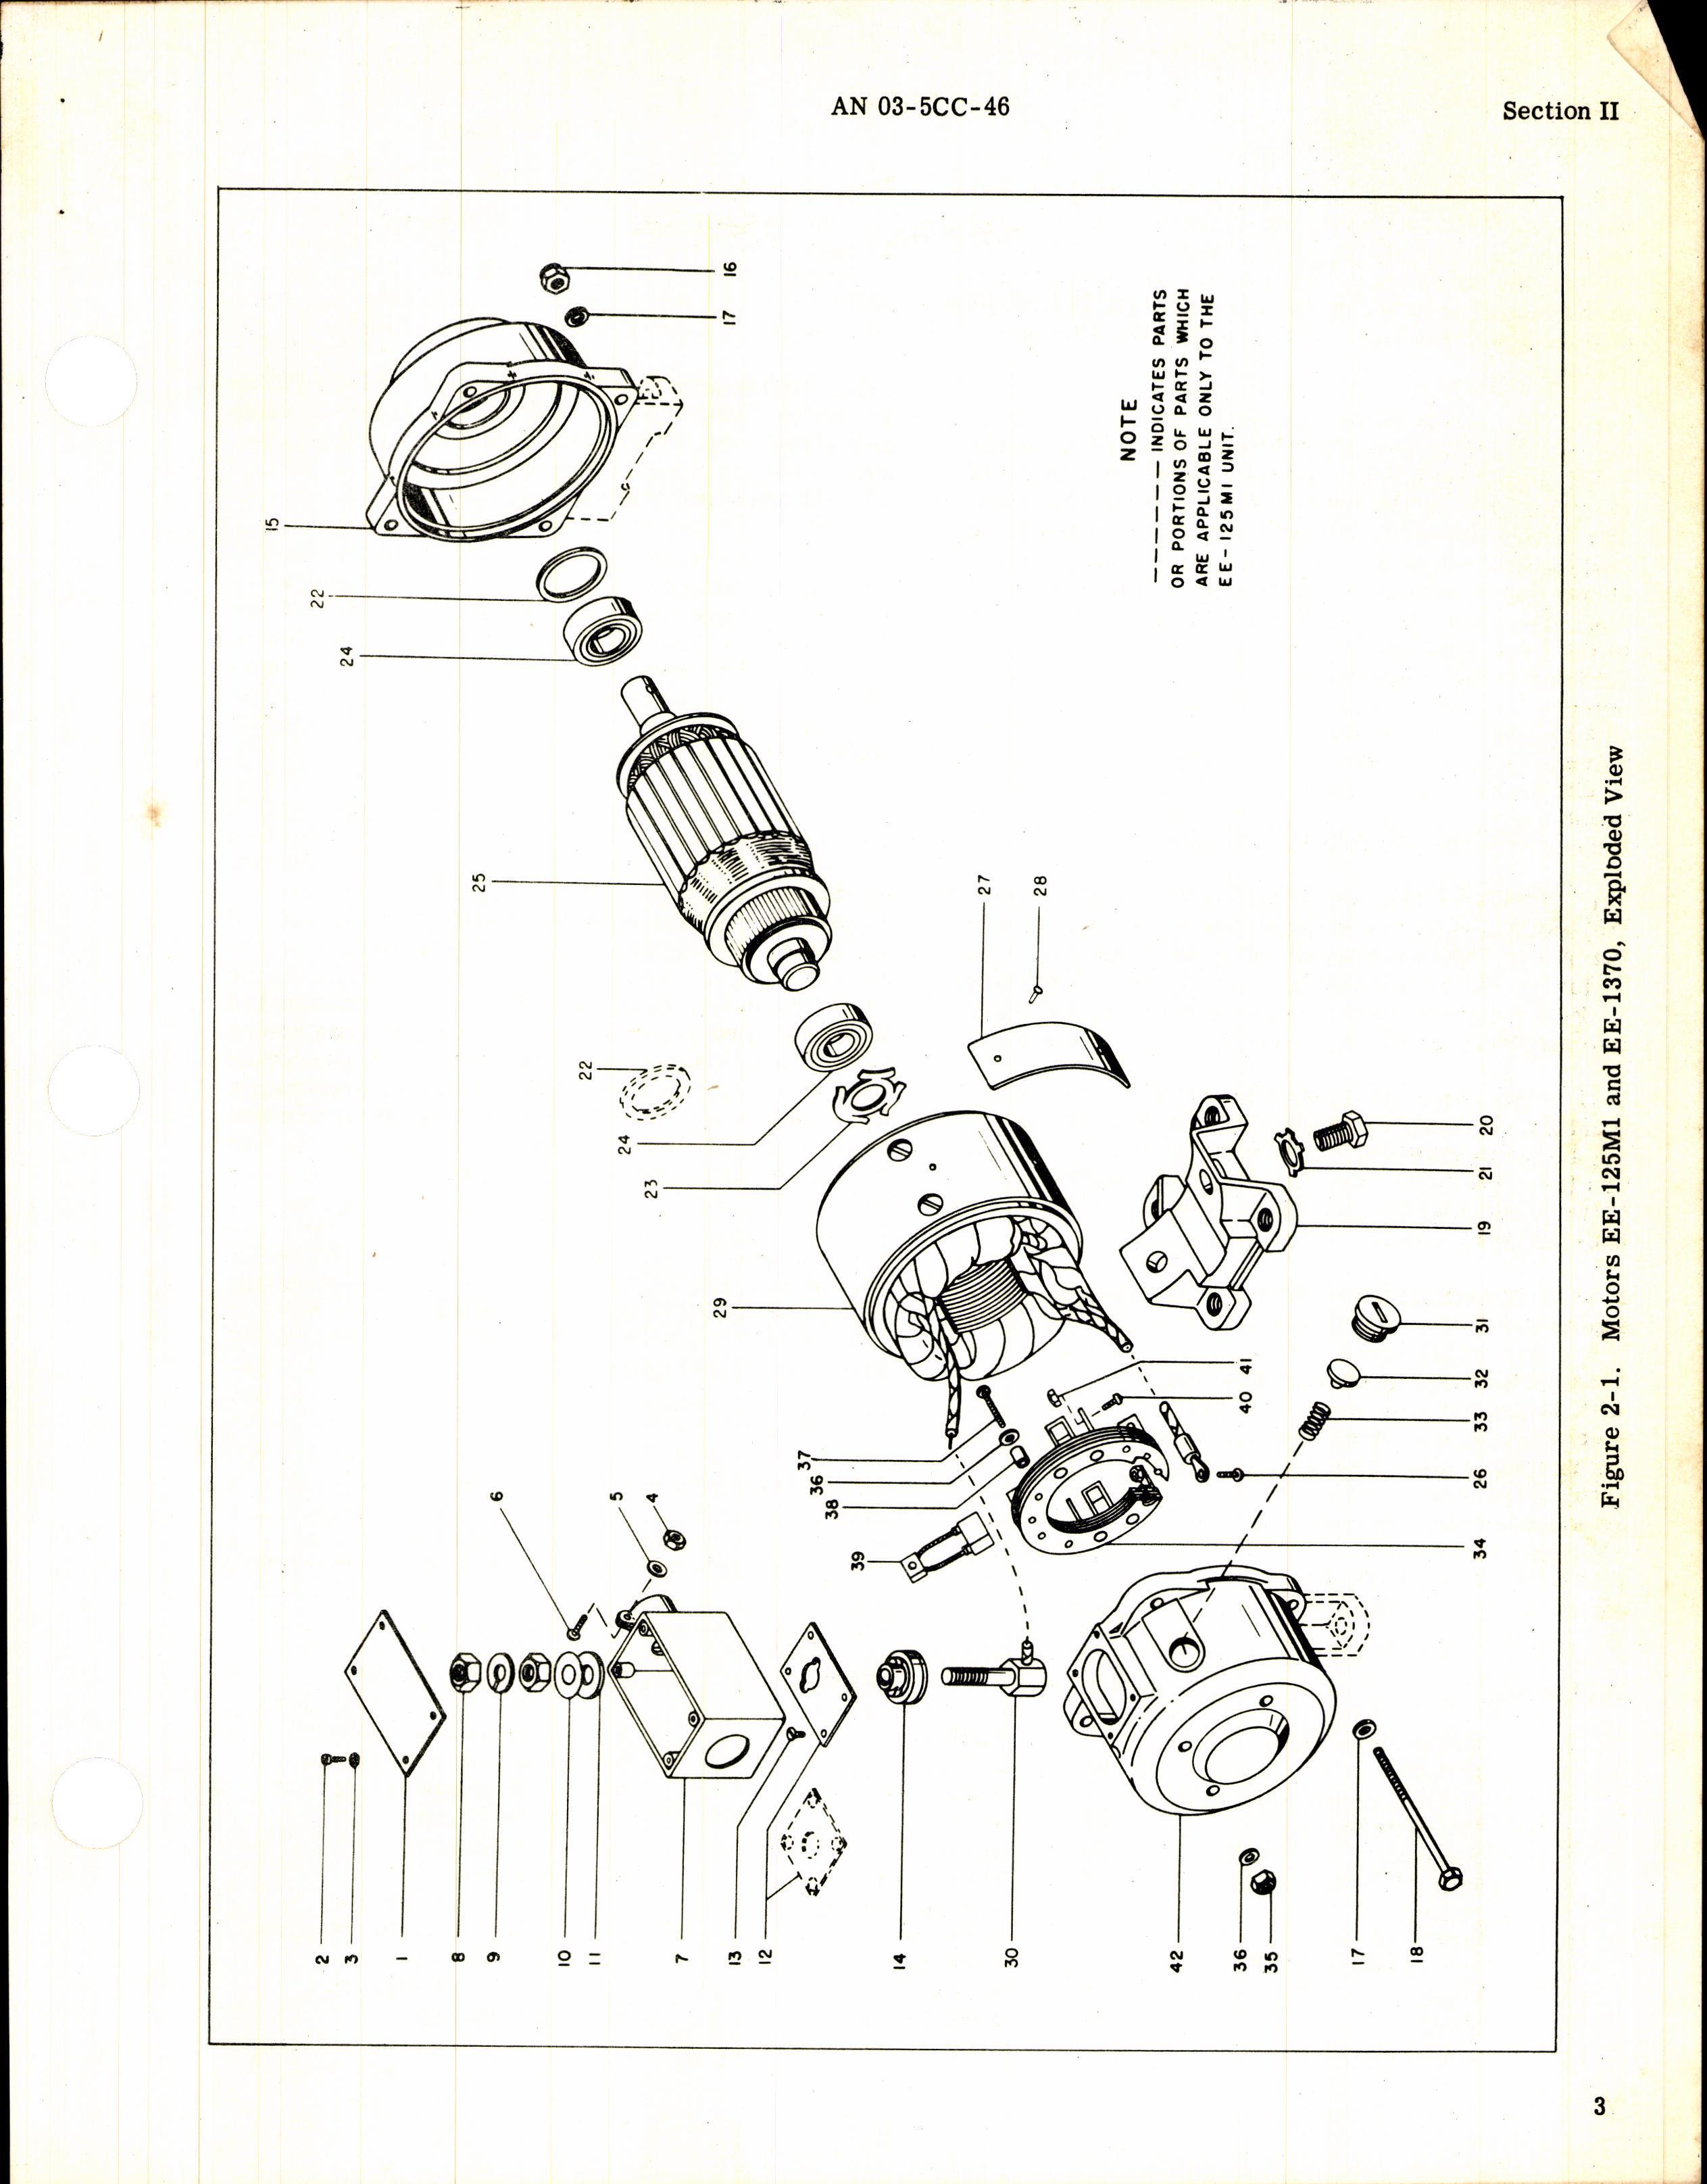 Sample page 5 from AirCorps Library document: Overhaul Instructions for Air Associates Electric Motors